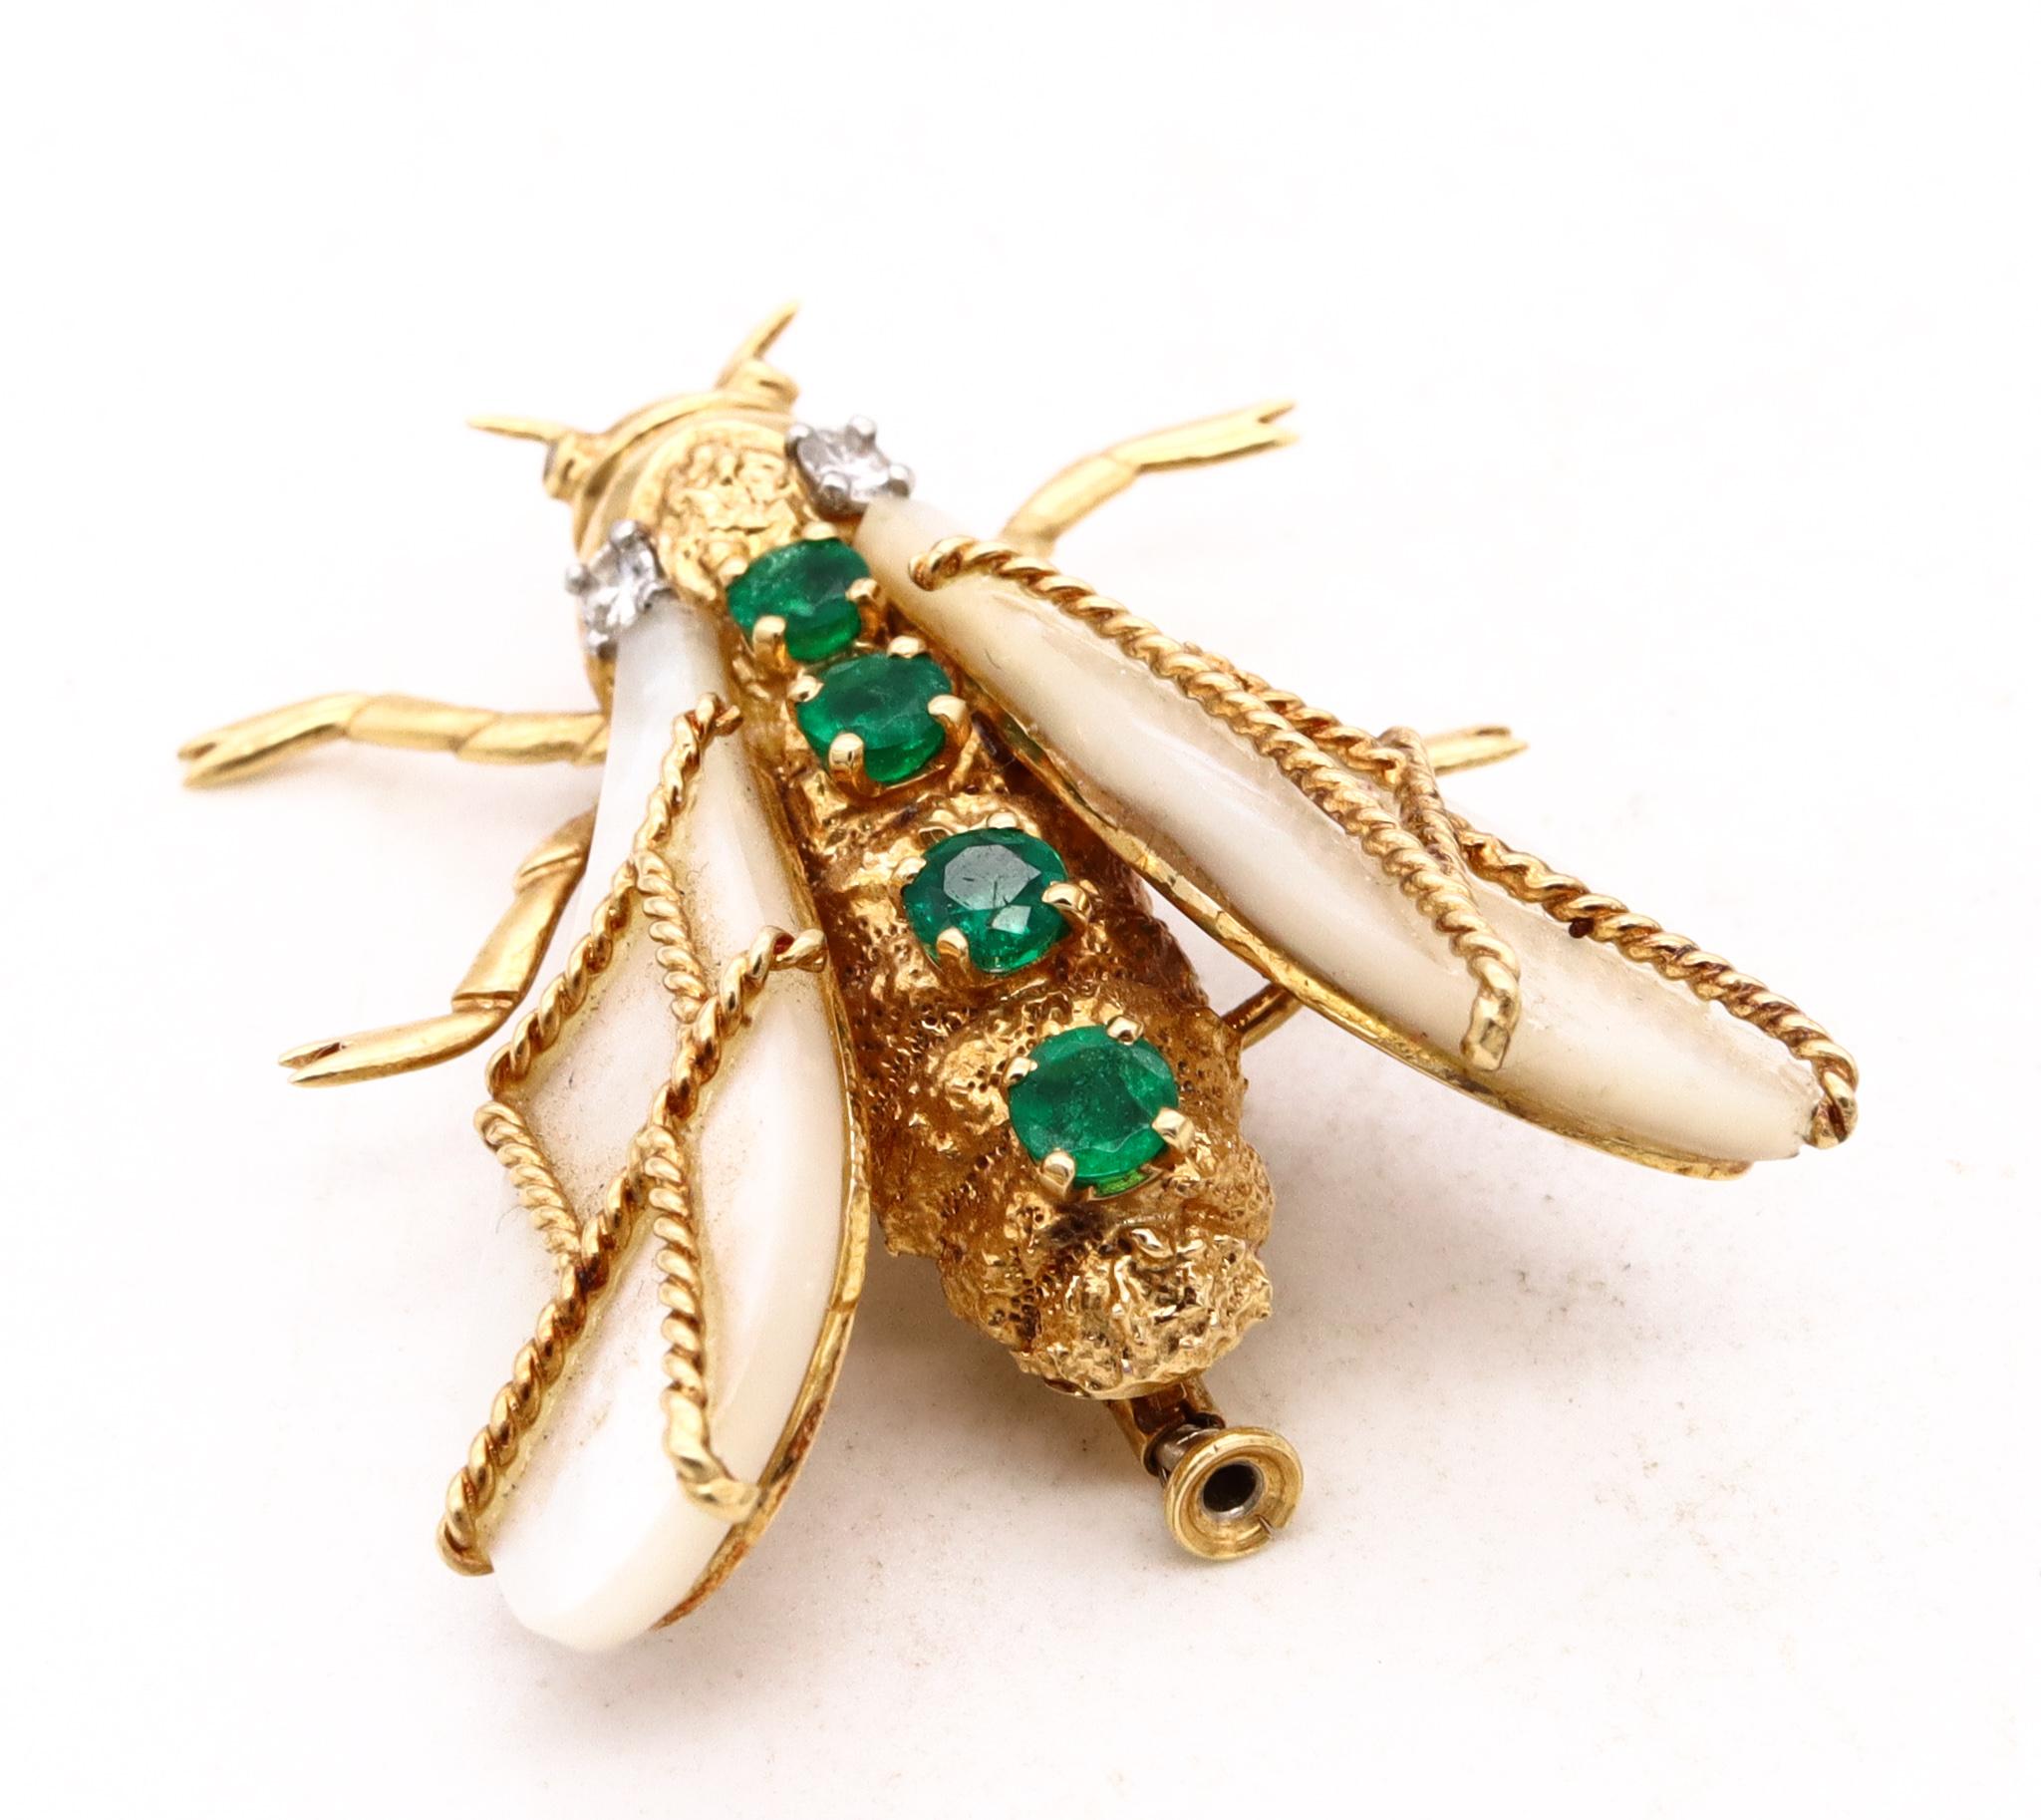 Retro Chaumet Paris 1960 Jeweled Bee Brooch in 18Kt Yellow Gold with Diamonds Emeralds